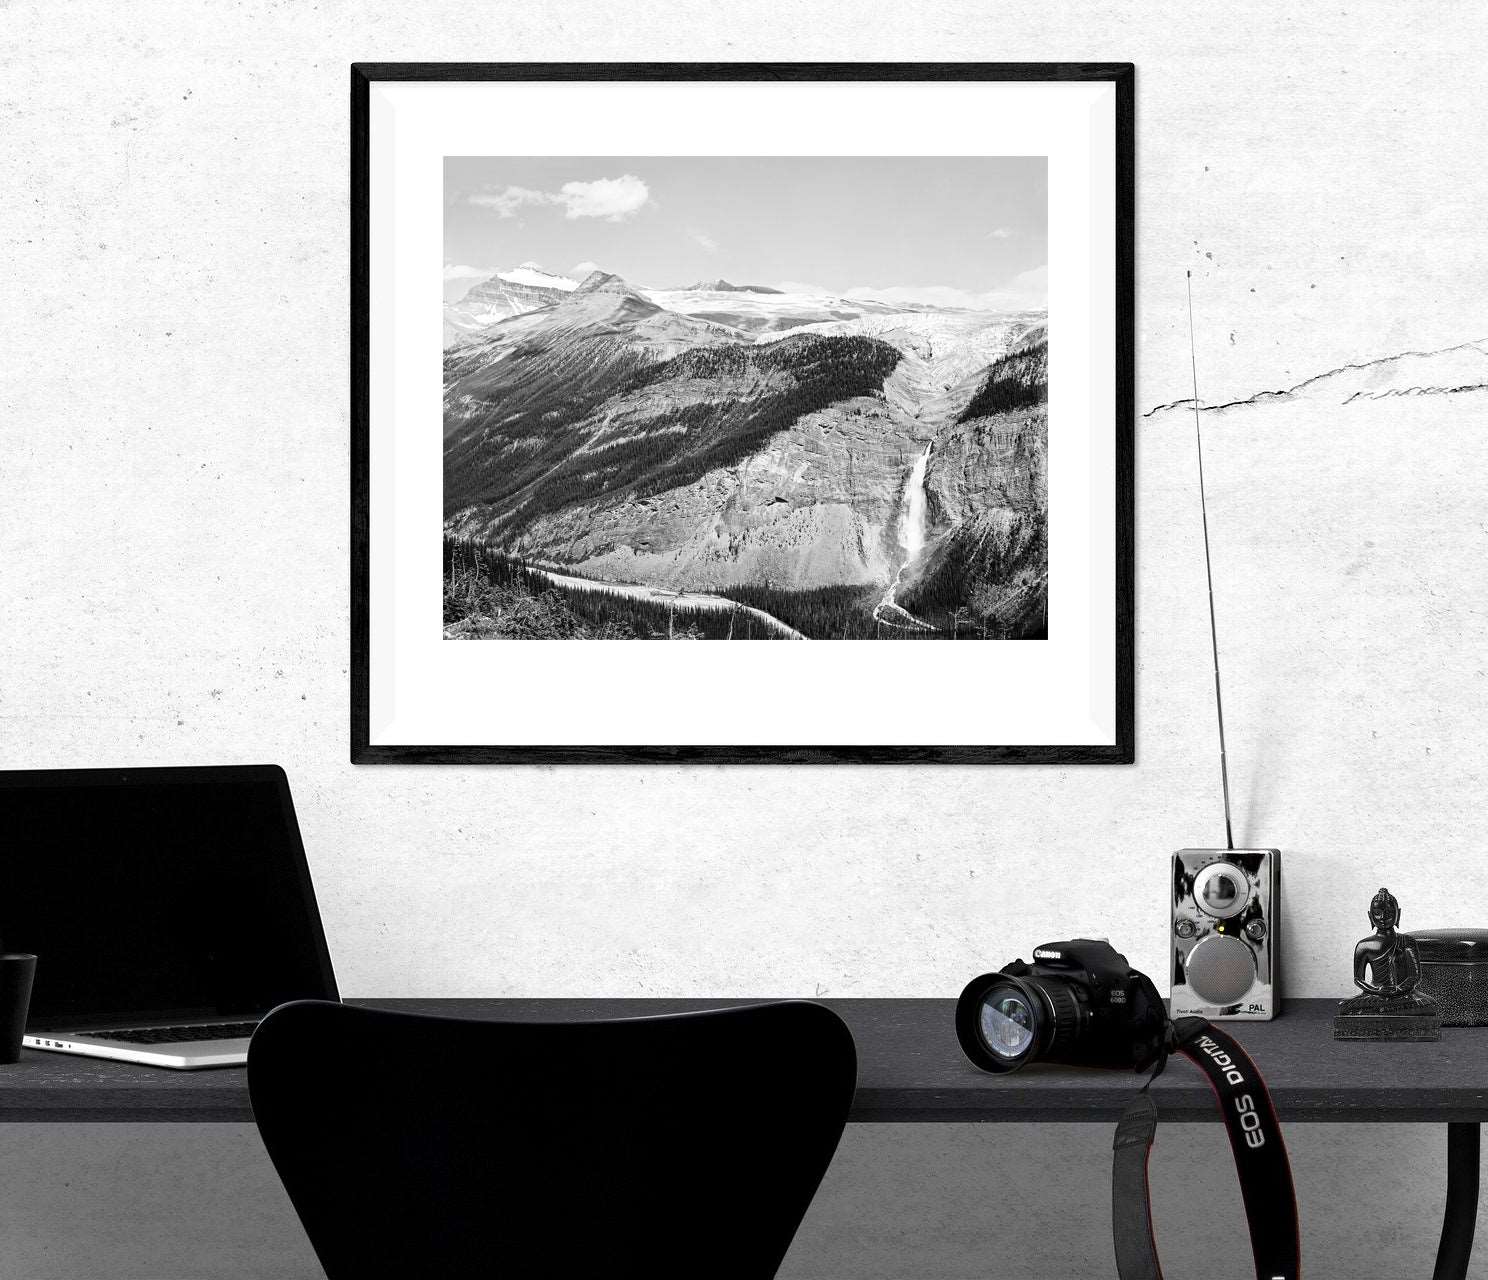 A mockup of a framed paper print of a black and white photograph hanging above a work desk